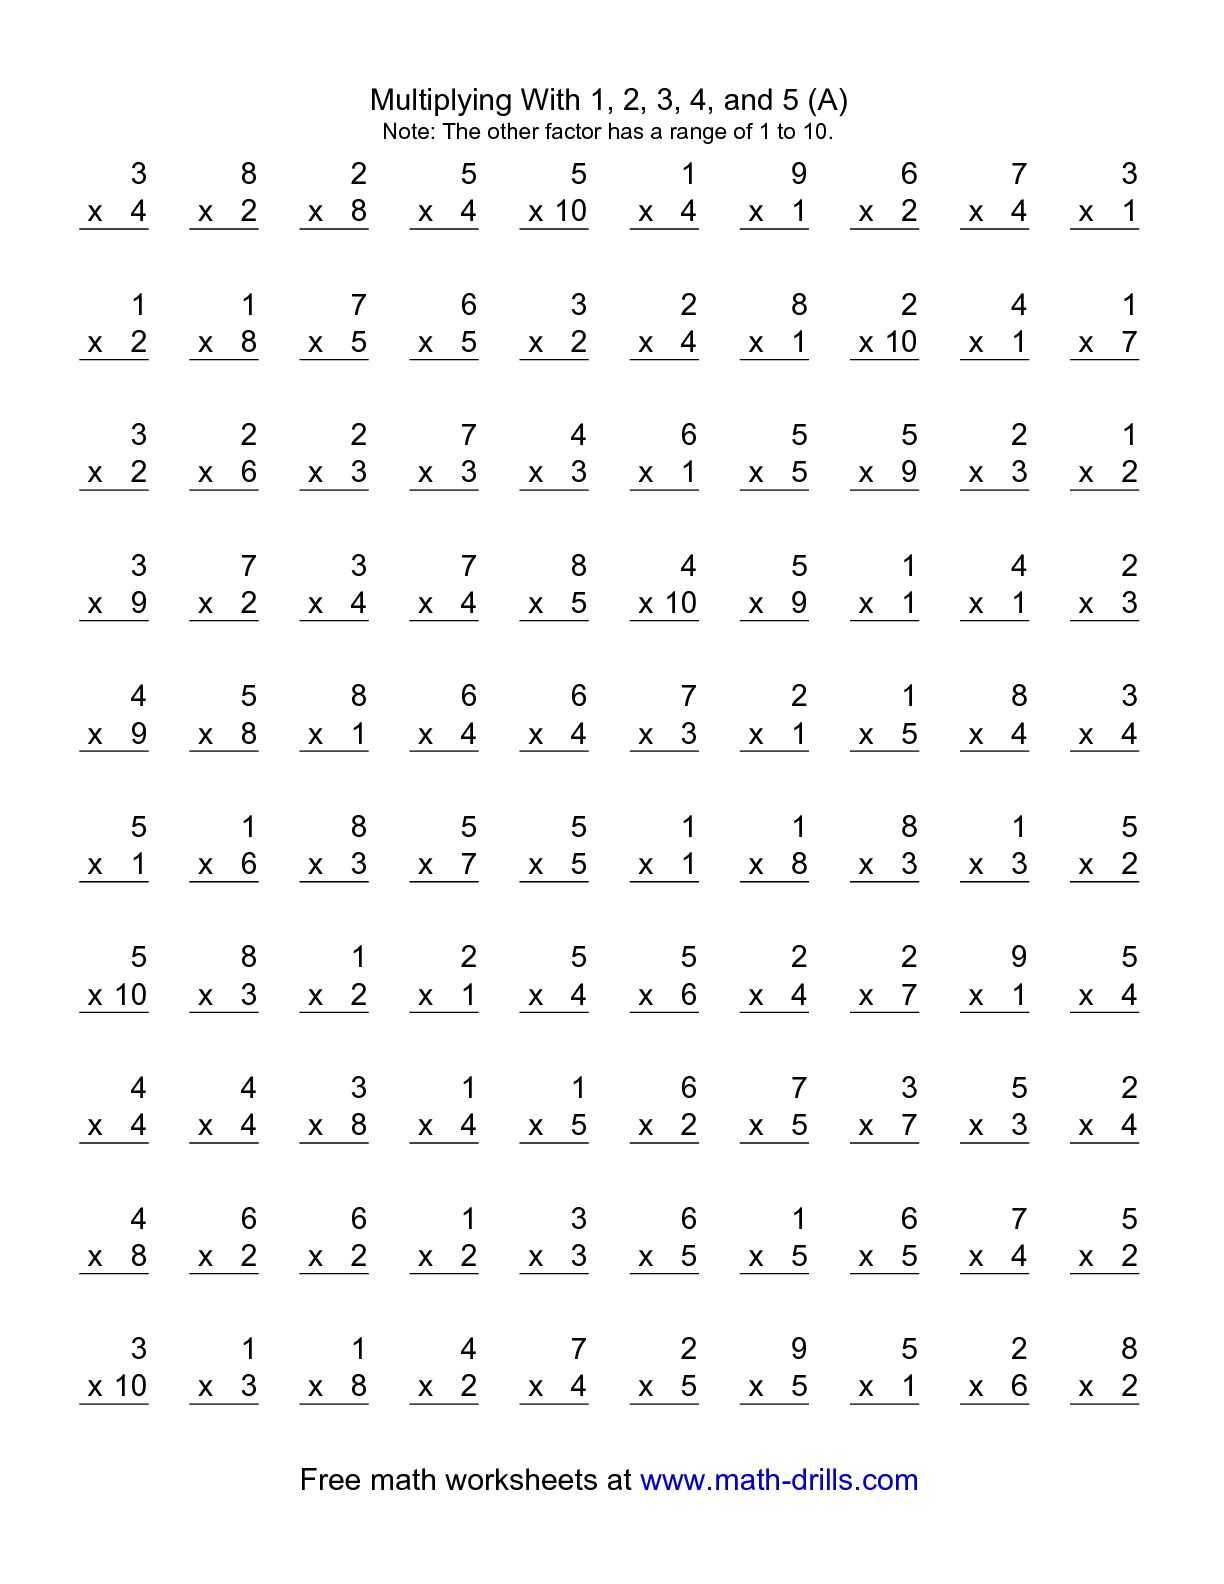 Chess Merit Badge Worksheet as Well as Multiplication Facts Worksheets Free Worksheets for All